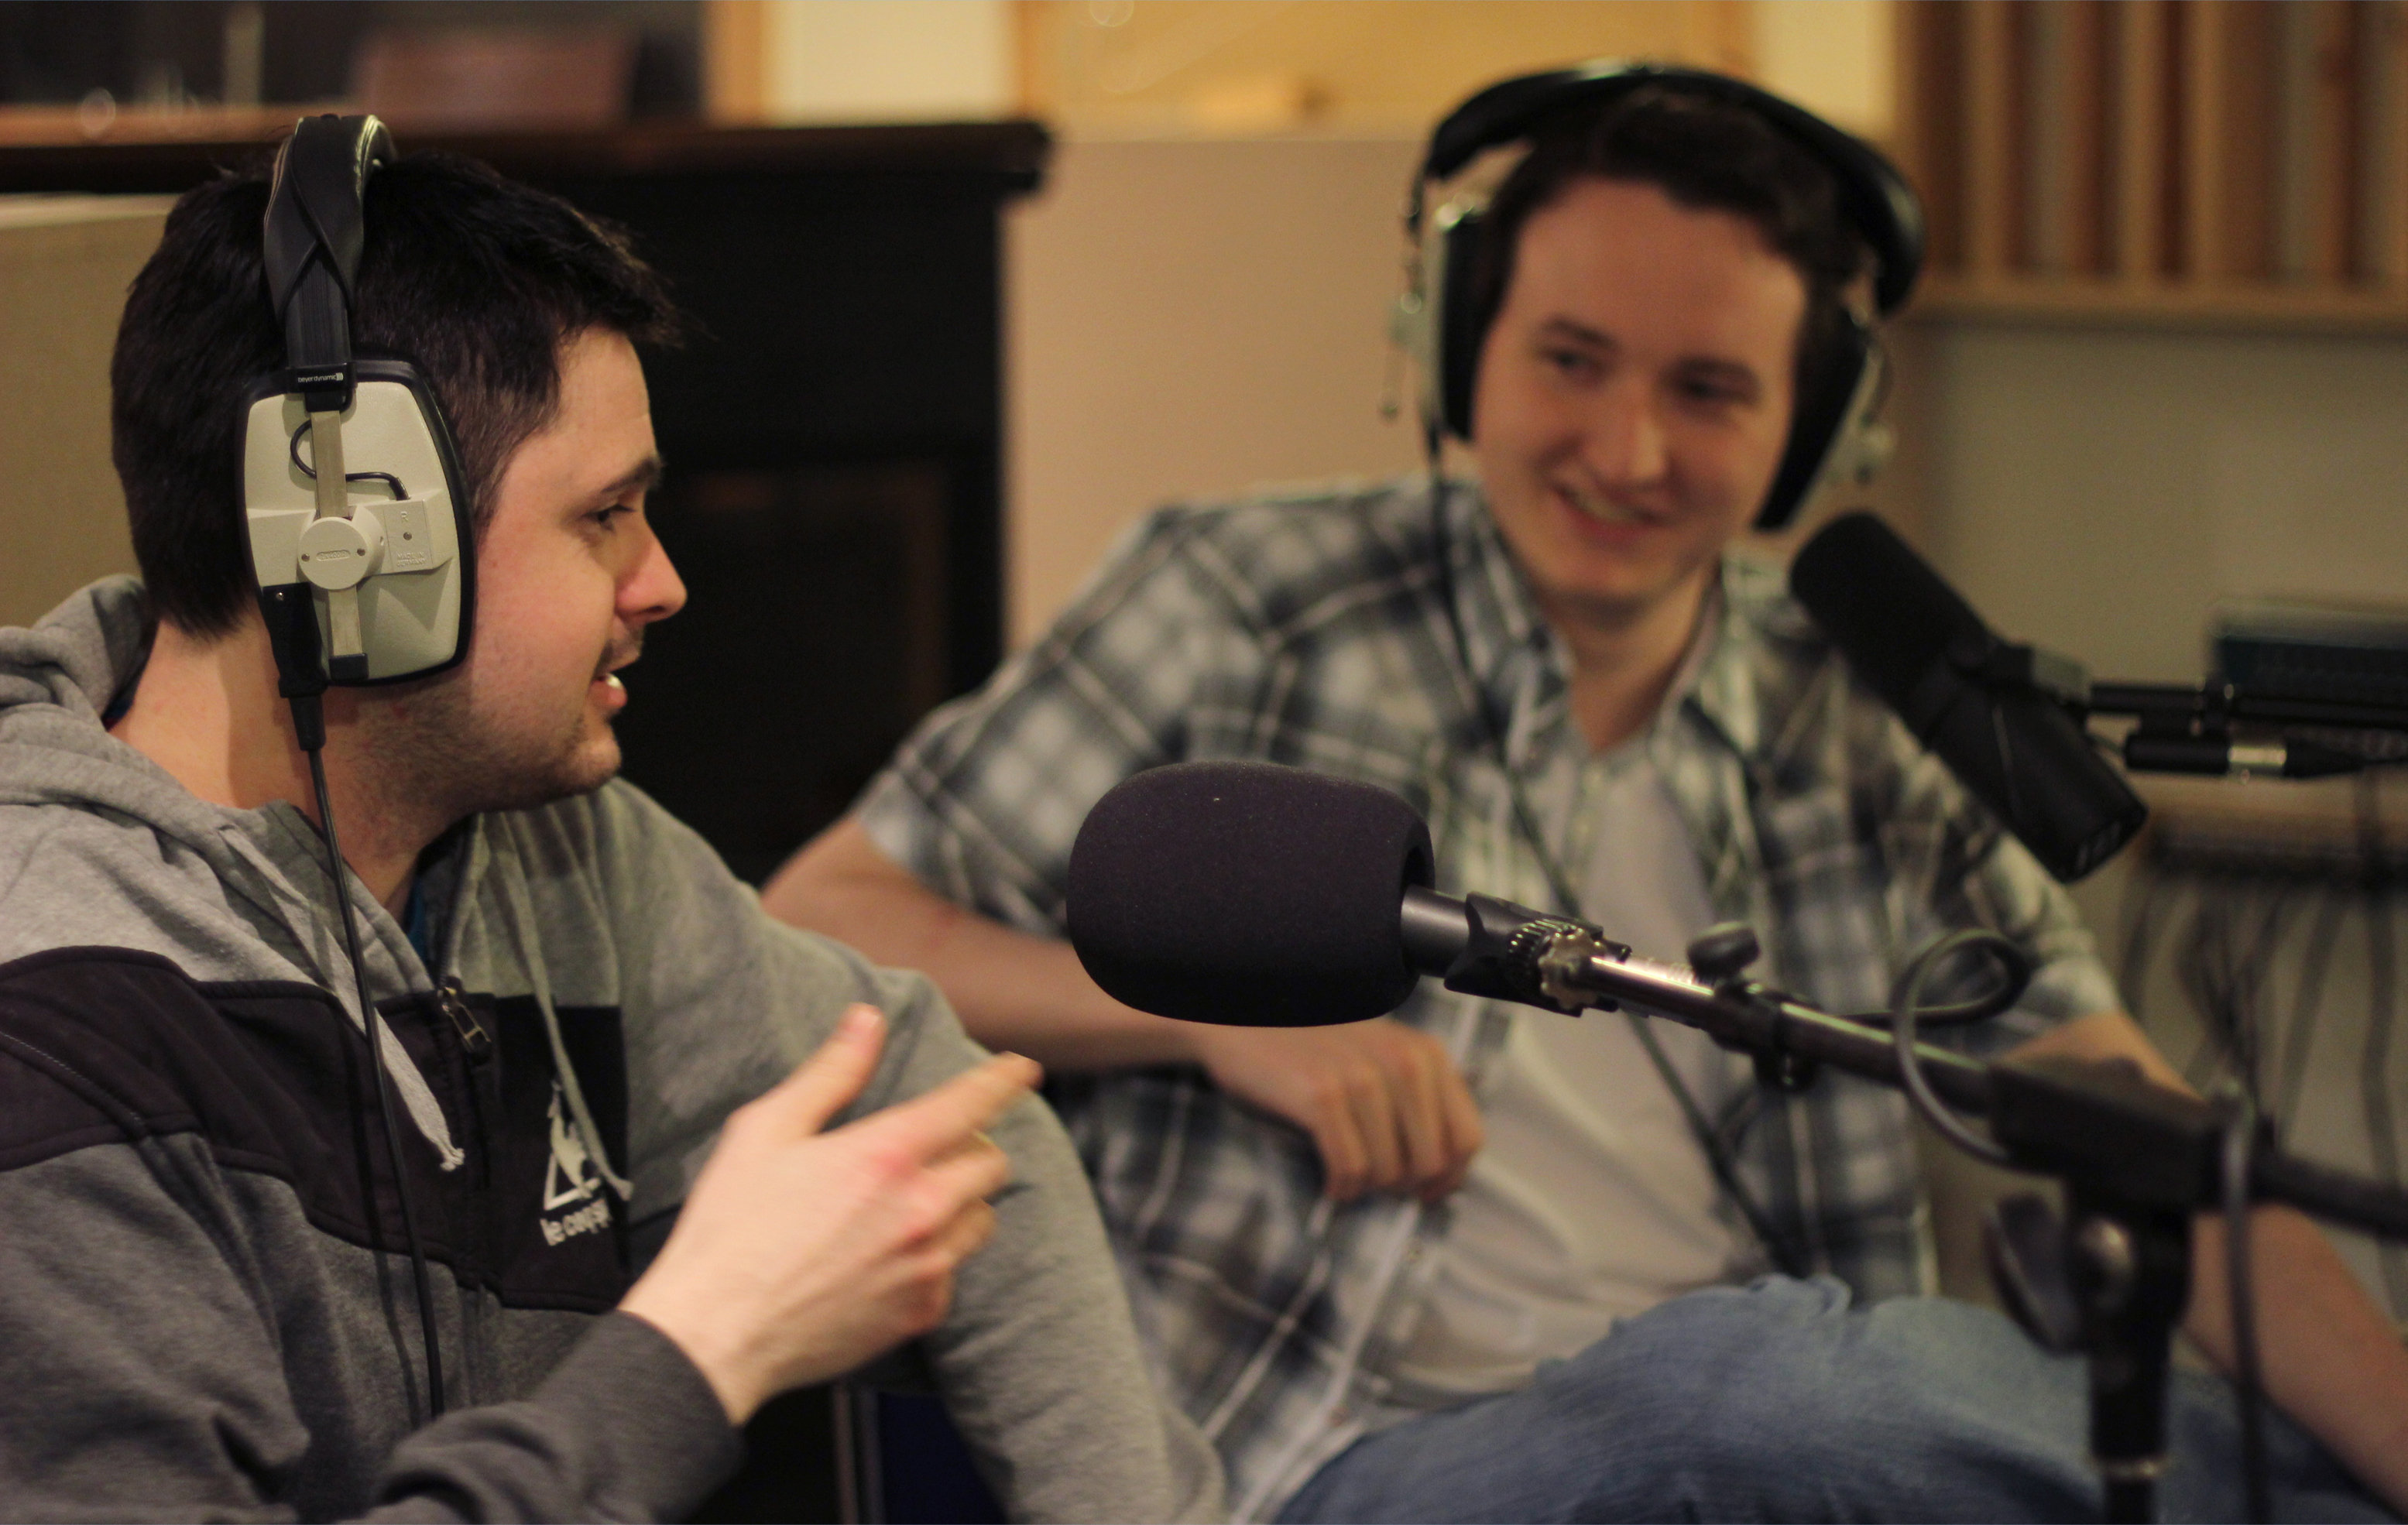 Andy S. McEwan (Left) and Chris Quick at the audio commentary recording for In Search of La Che.